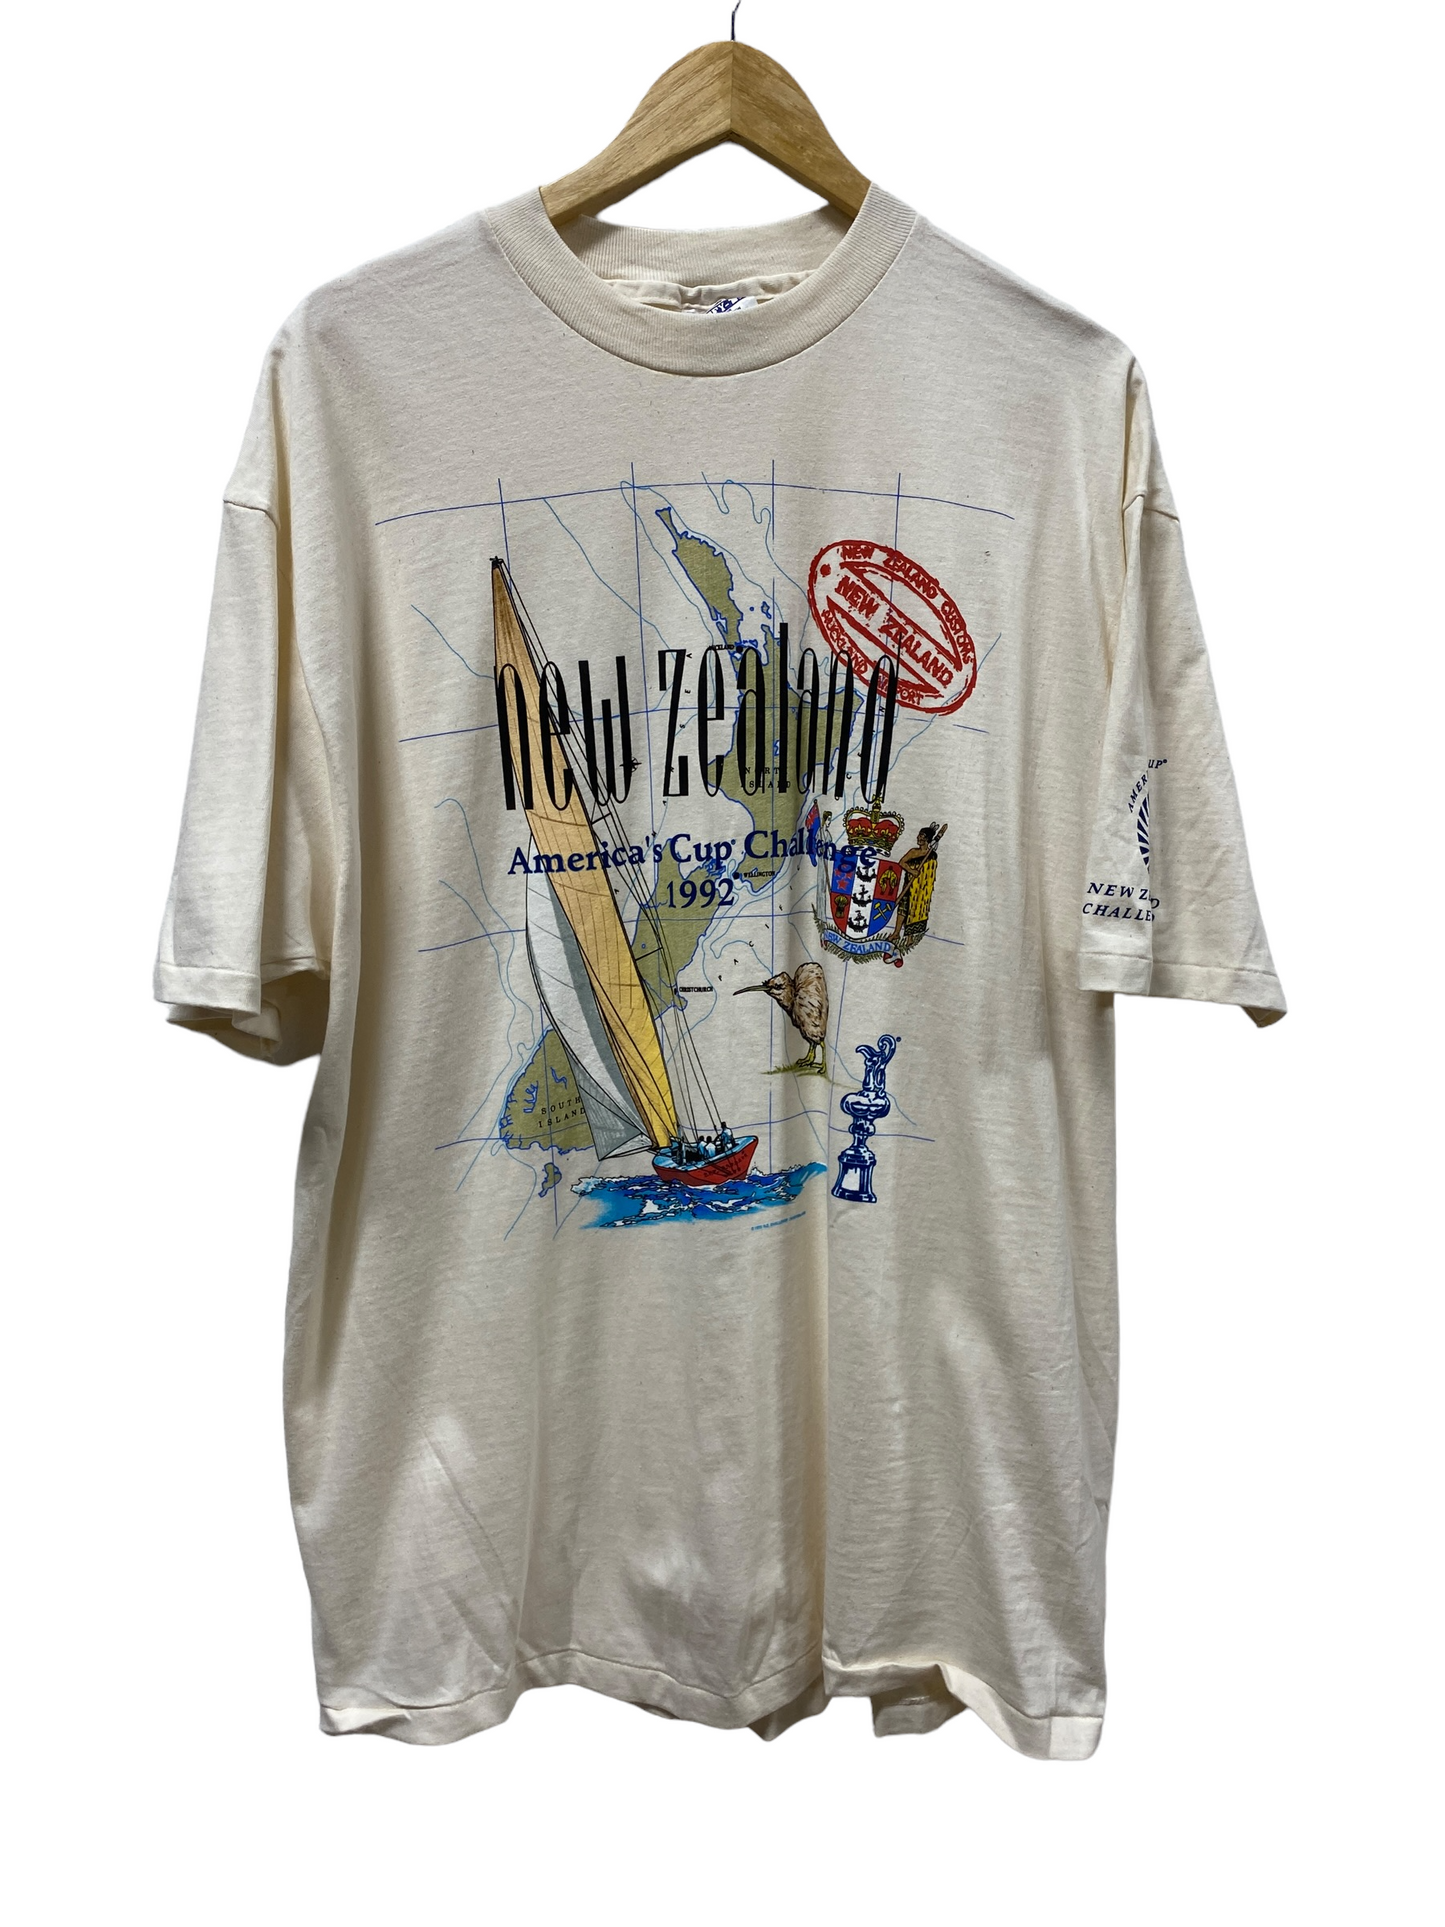 Vintage 1992 New Zealand America Cup Sailing Tee Size XL